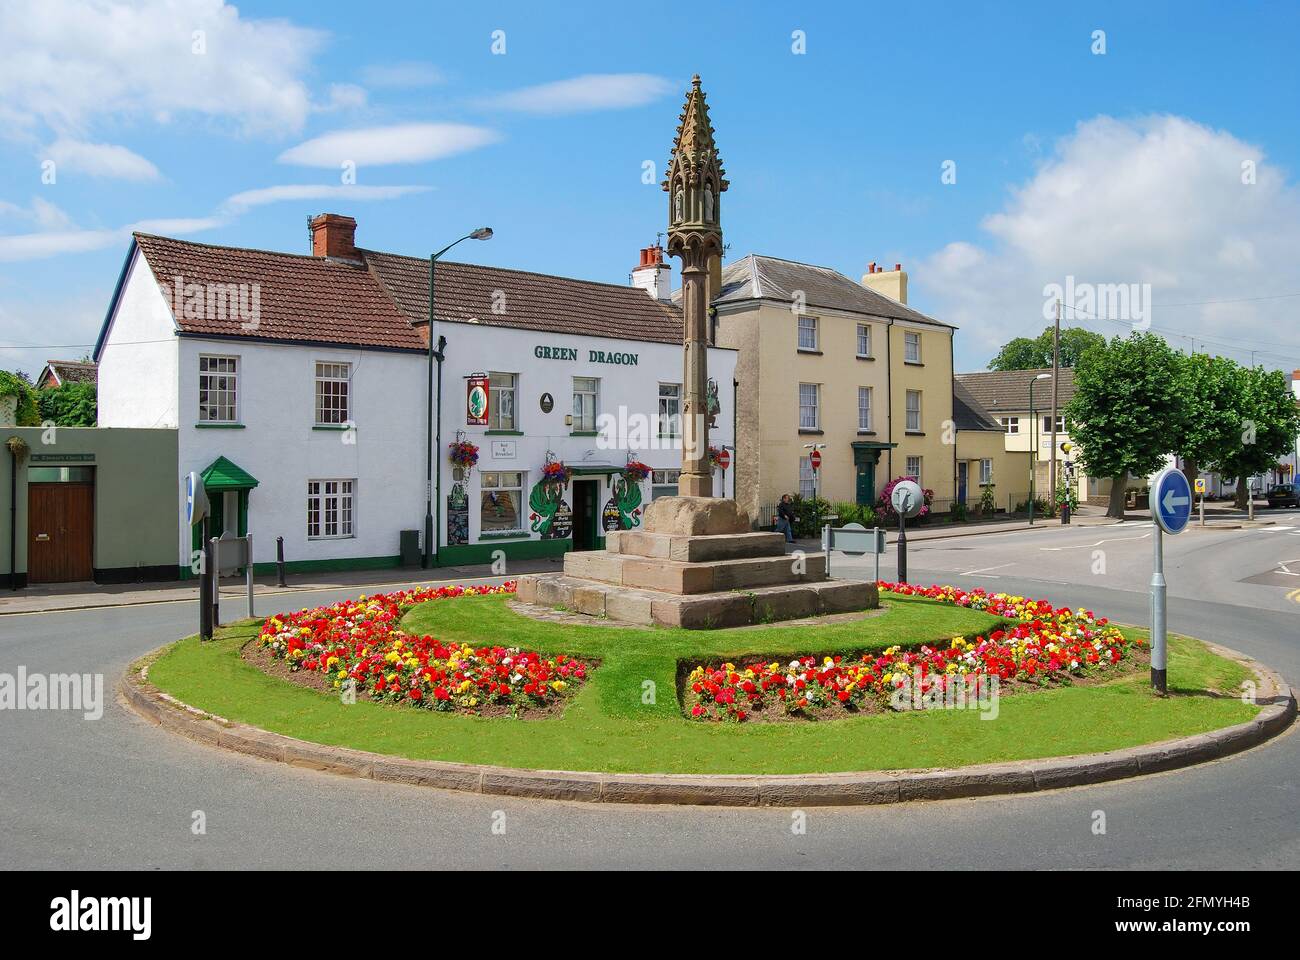 Overmonnow Cross and Green Dragon Pub, St.Thomas's Square, Monmouth, Monmouthshire, Wales, United Kingdom Stock Photo